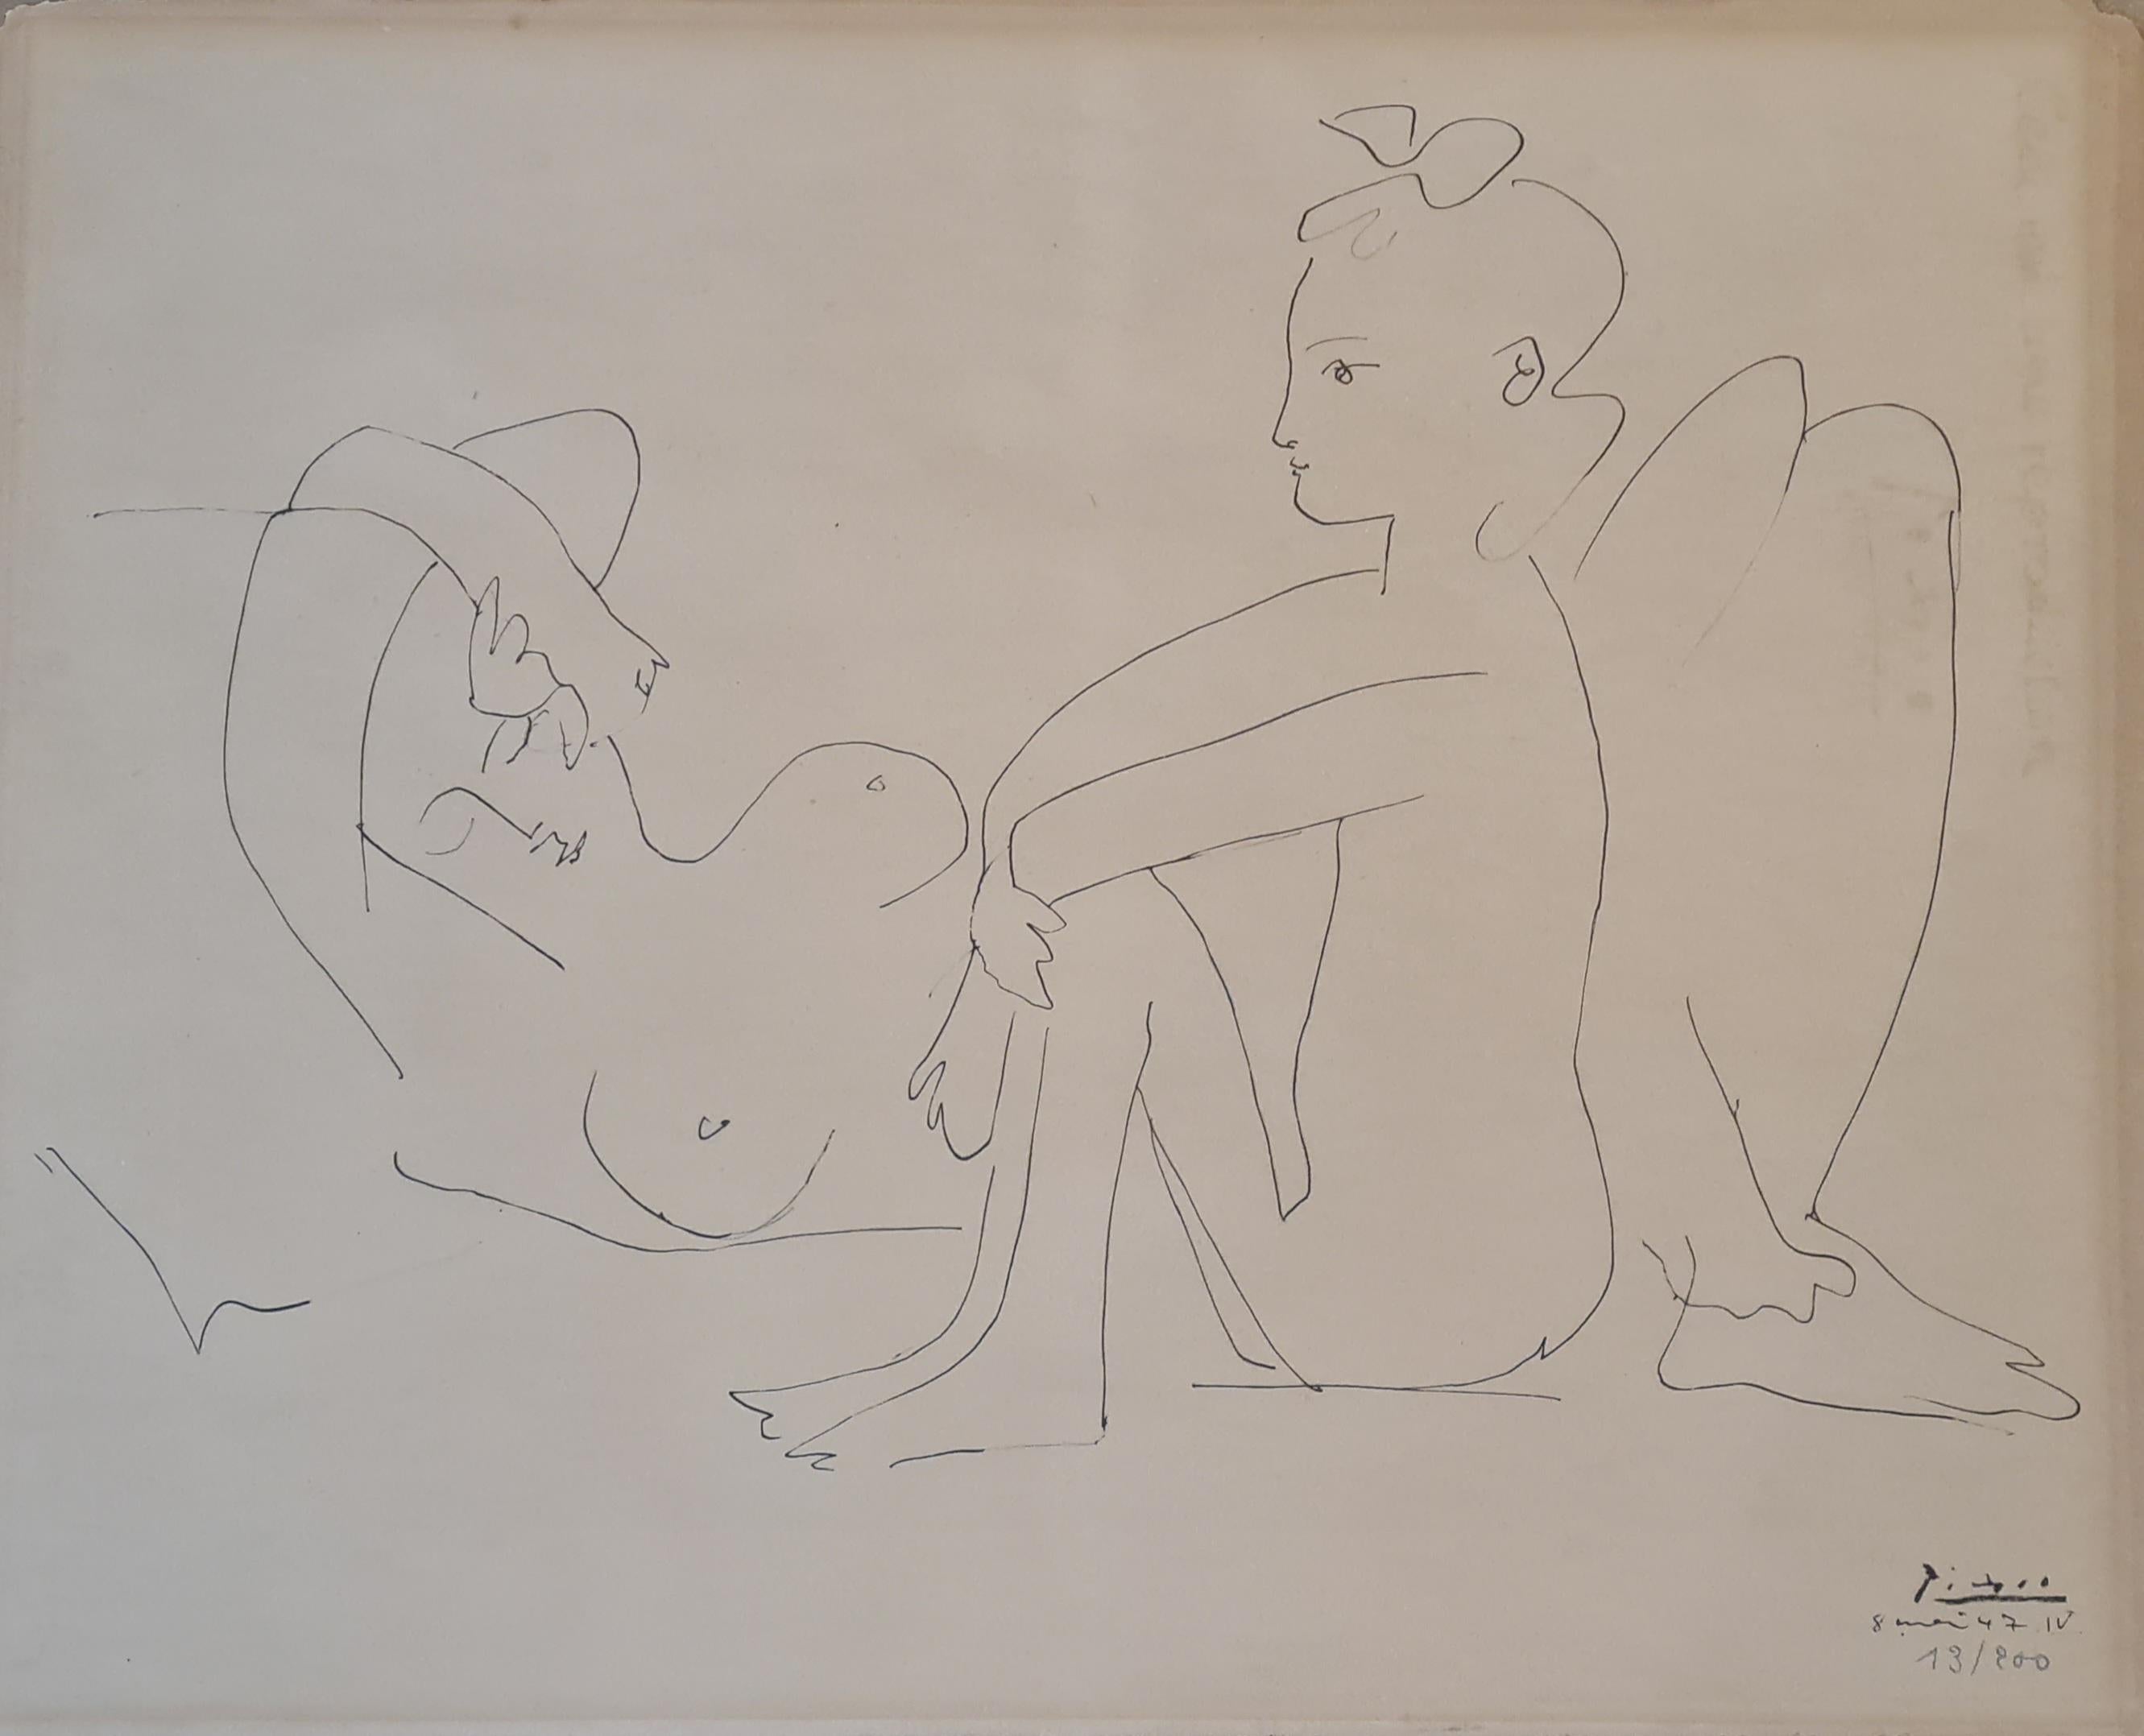 (after) Pablo Picasso Figurative Print - Le Repos IV, Signed/Dated Picasso 8 Mai 47 'dans la planche'. Numbered in Pencil